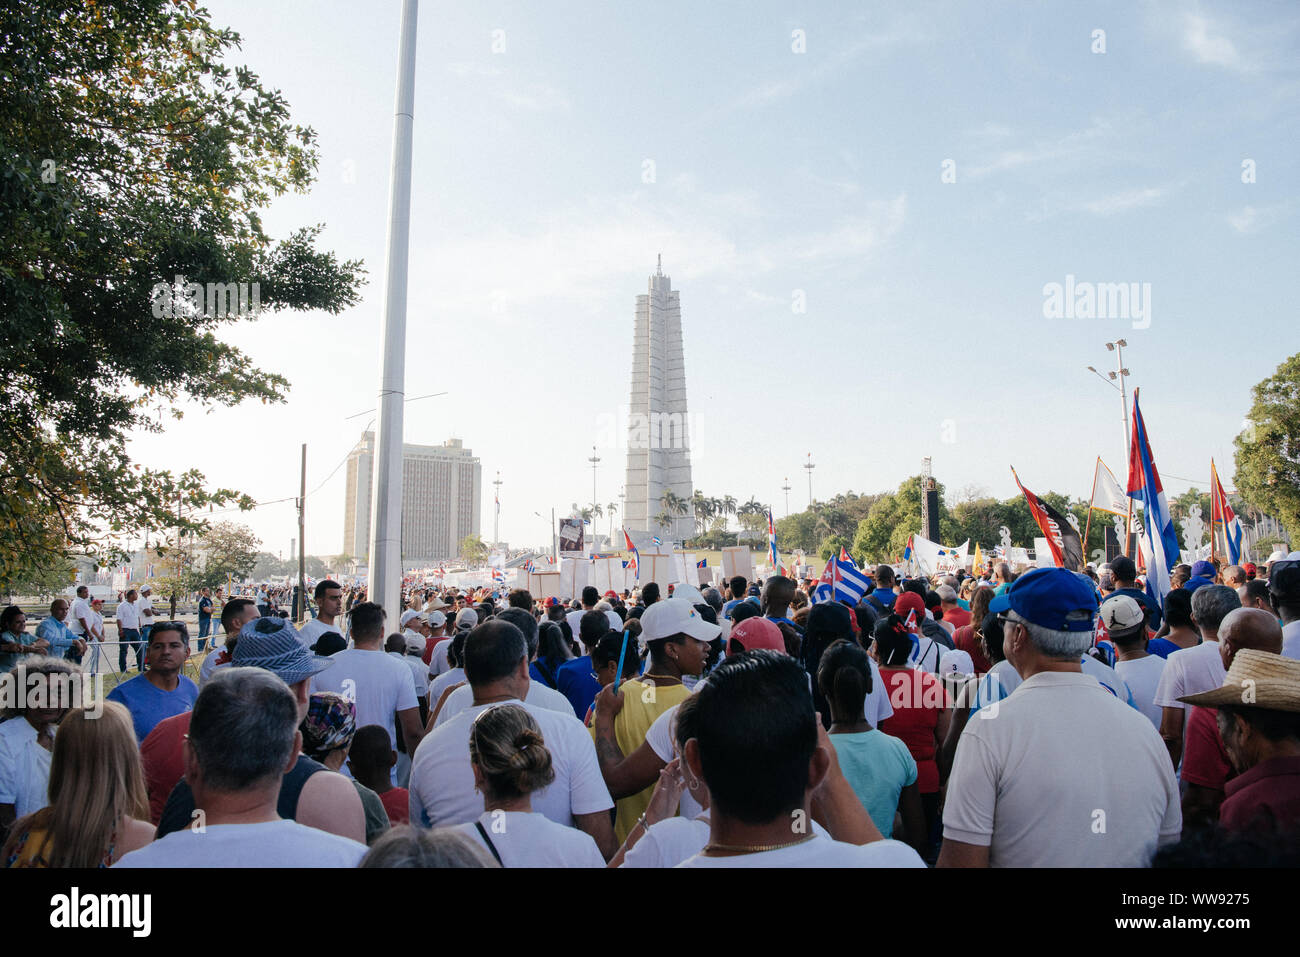 The Havana Cuba march in support of International Worker's Day in 2018. Stock Photo